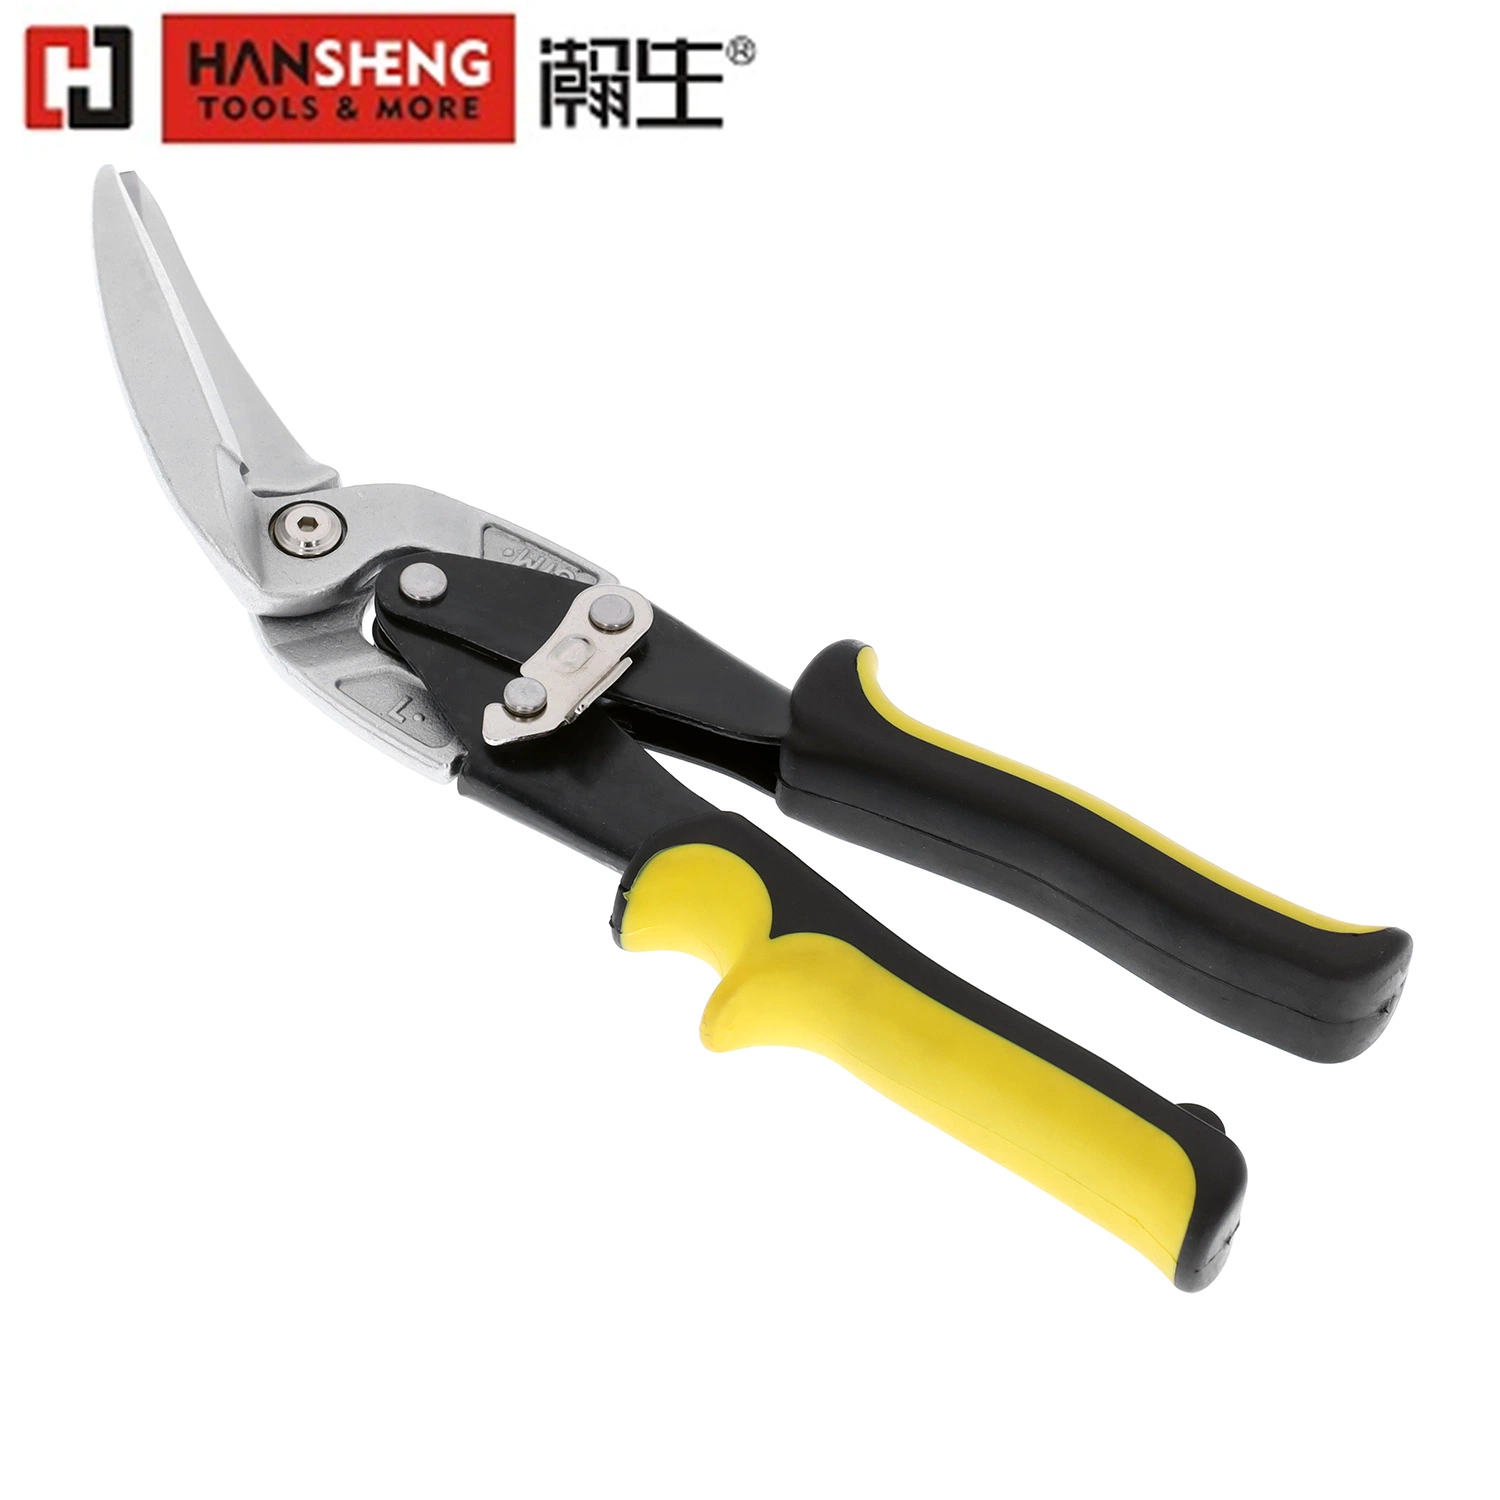 Professional Hand Tools Made of Carbon Steel, Cr-V, Cr-Mo, Matt Finish, Nickel Plated, TPR Handle, Straight, Right and Left, Heavy Duty, Aviation Snips